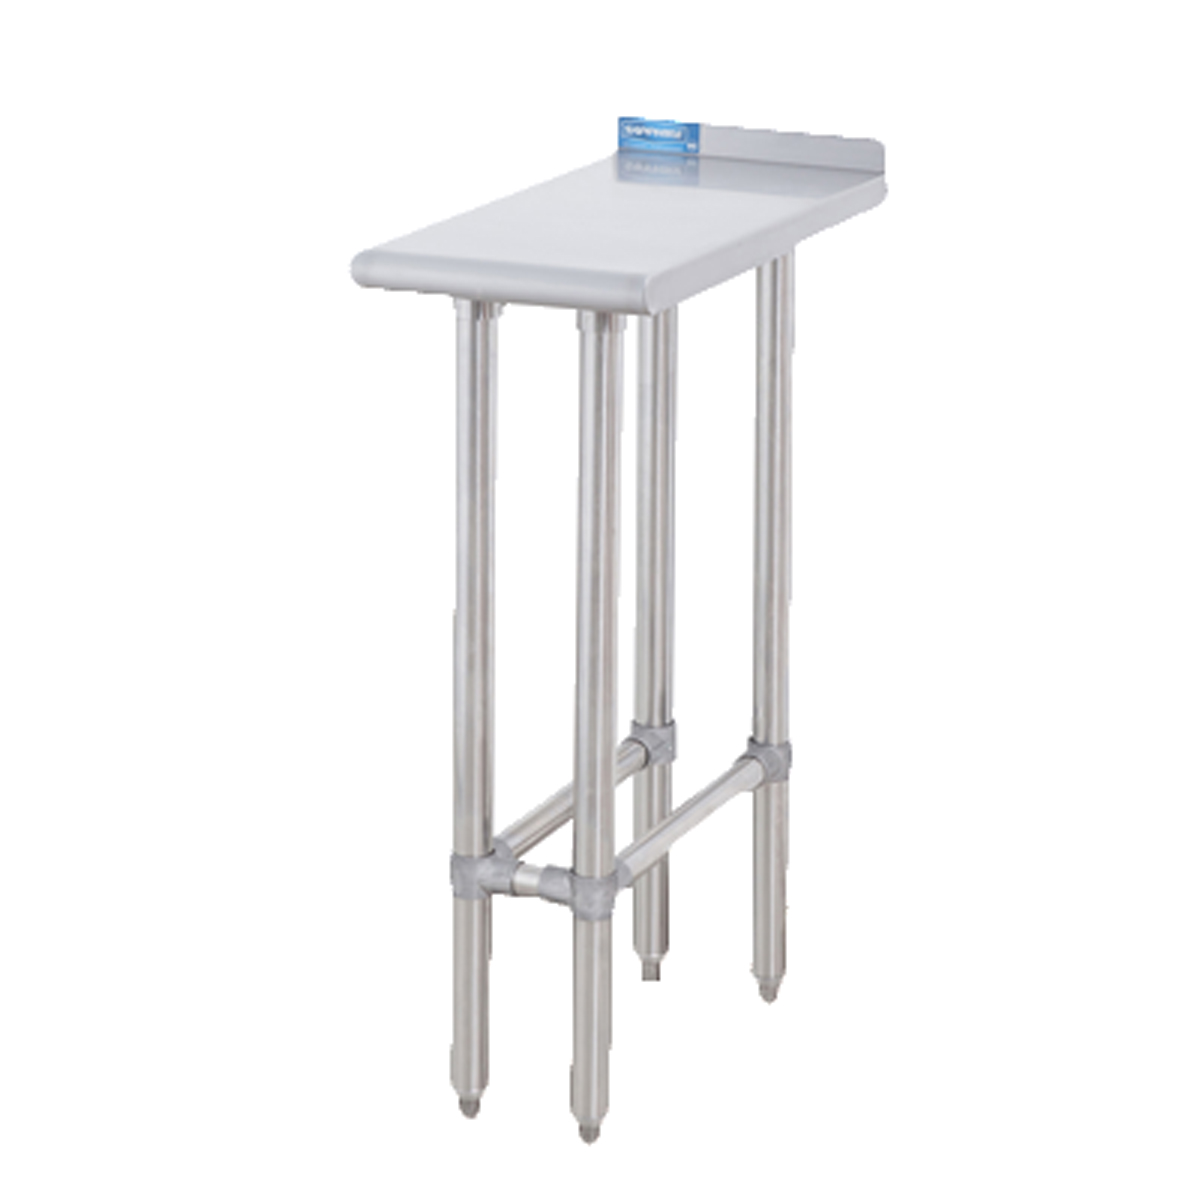 Sapphire SMEFT-2415 Equipment Filler Table with Stainless Steel Top, 15"W x 24"D